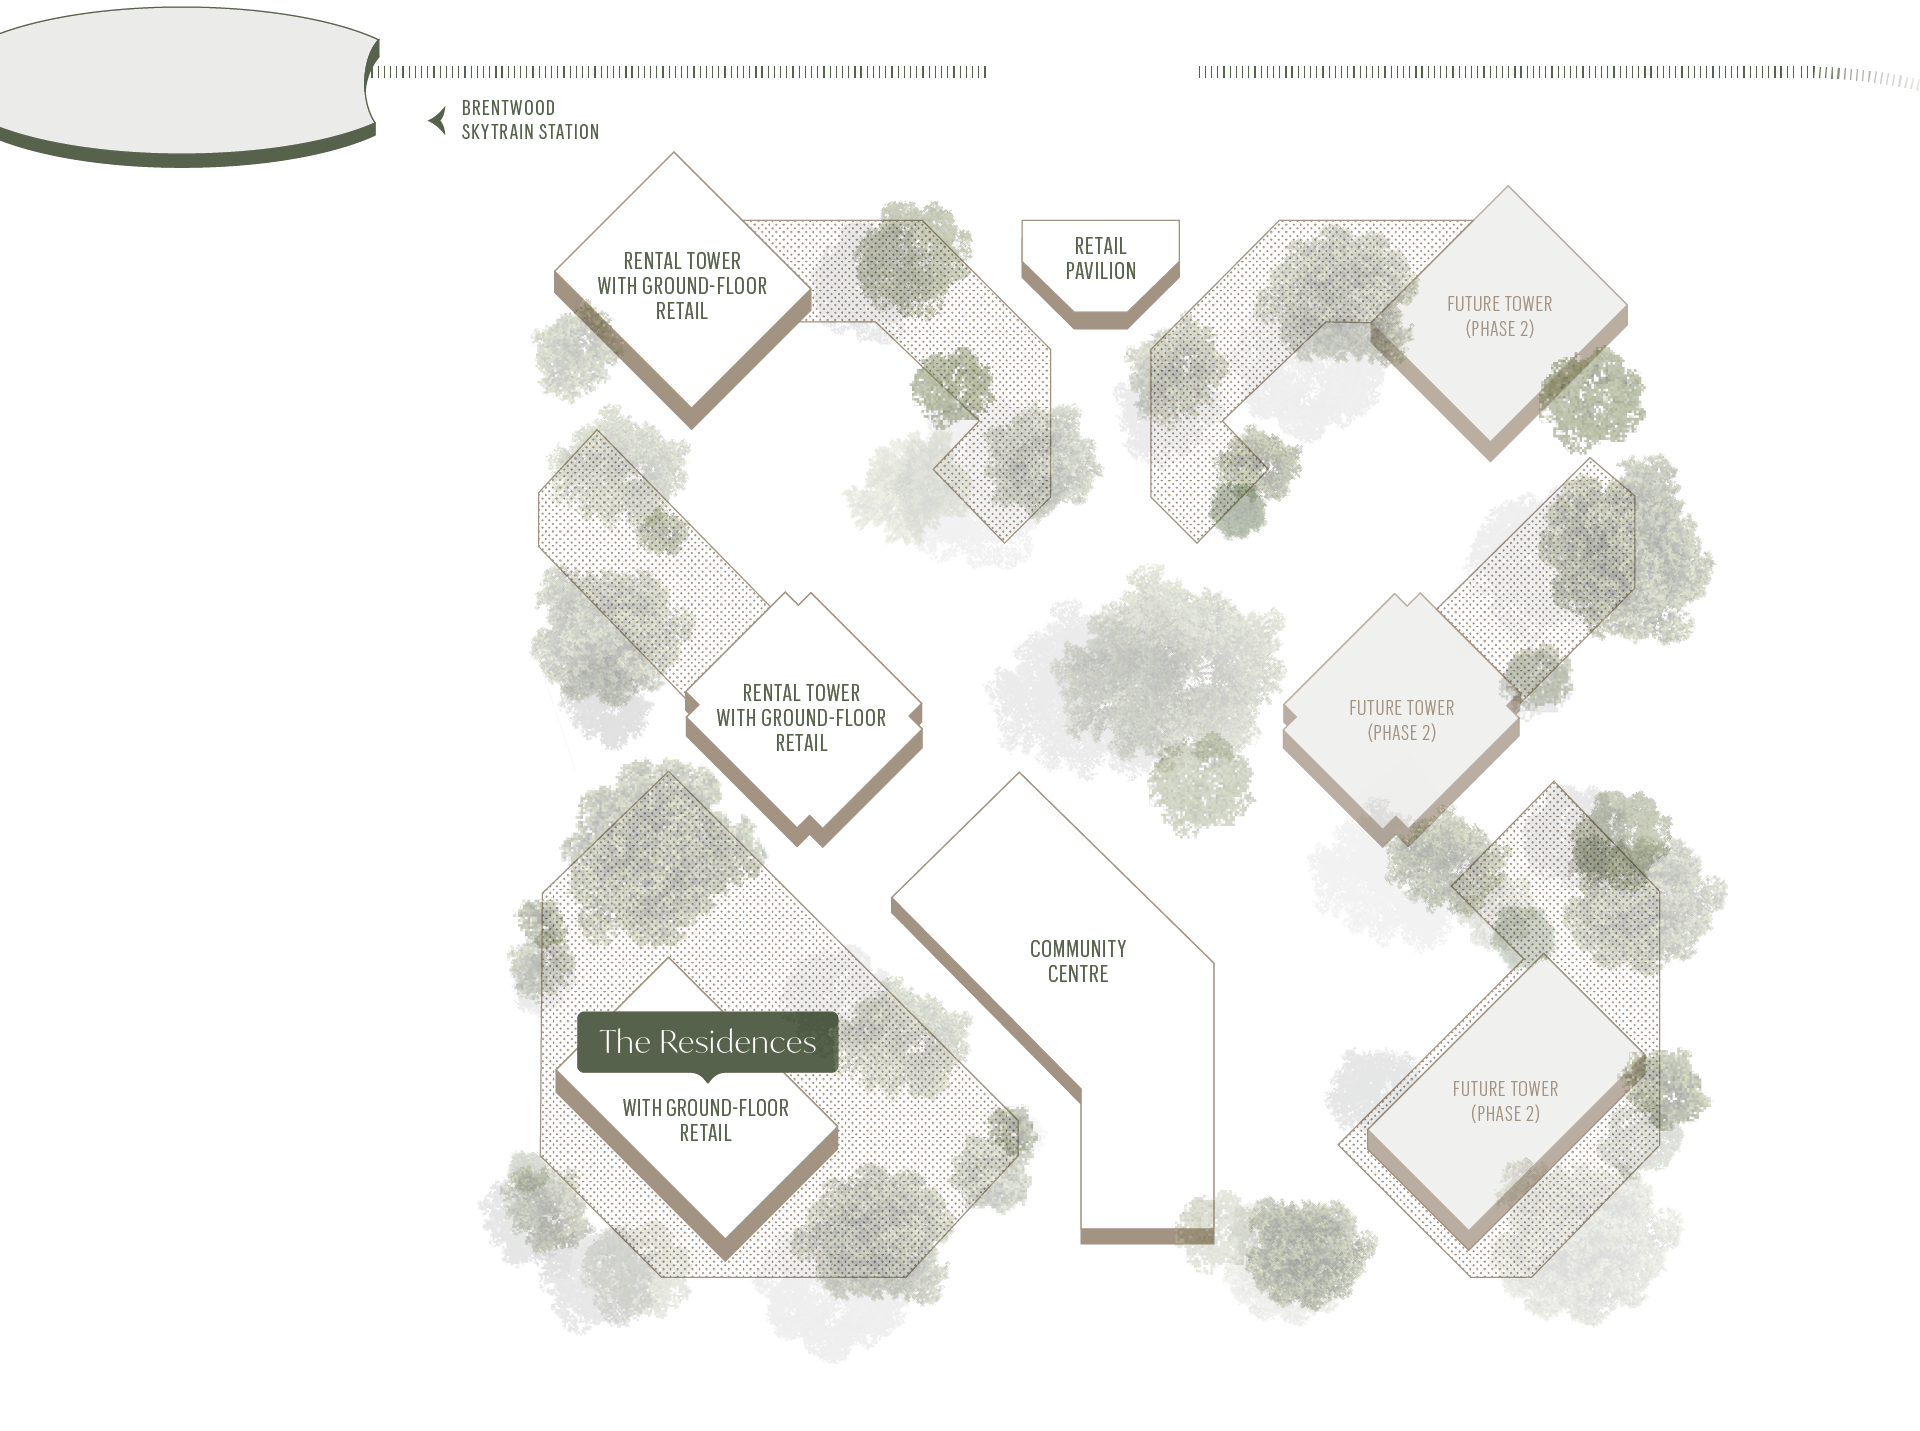 Siteplans zone showing buildings with names